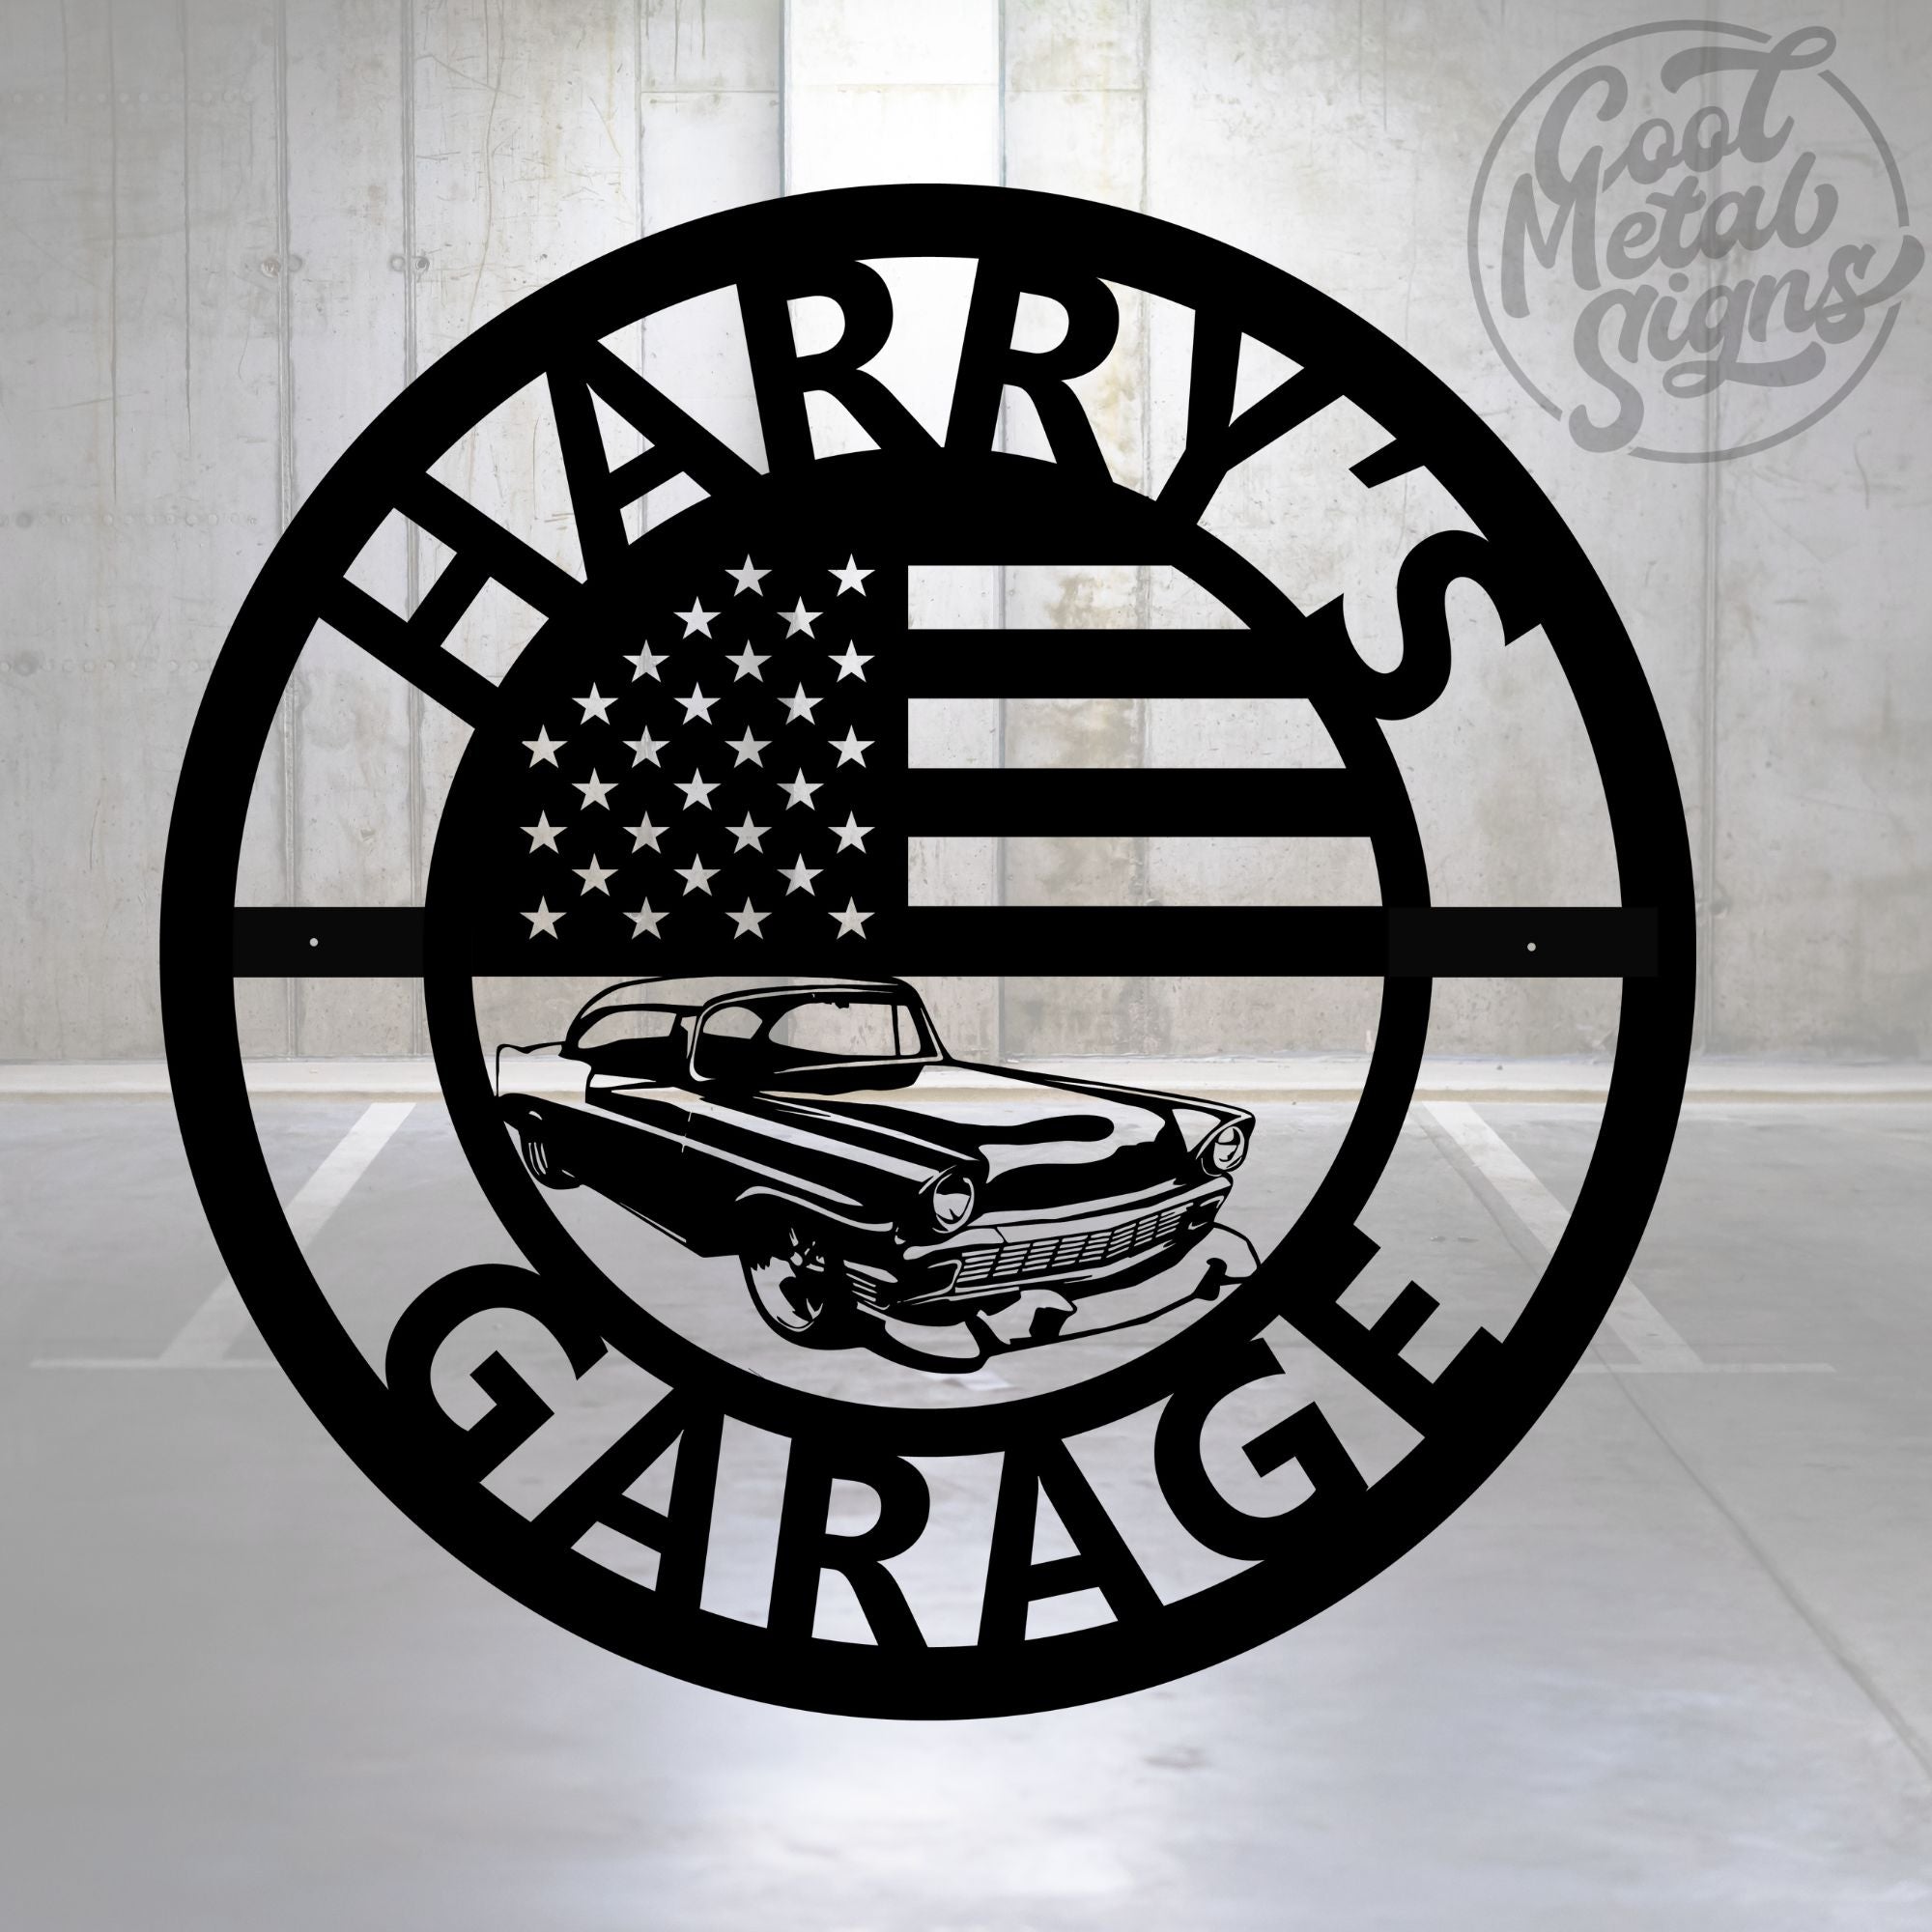 Personalized Classic Car Garage Sign - Cool Metal Signs